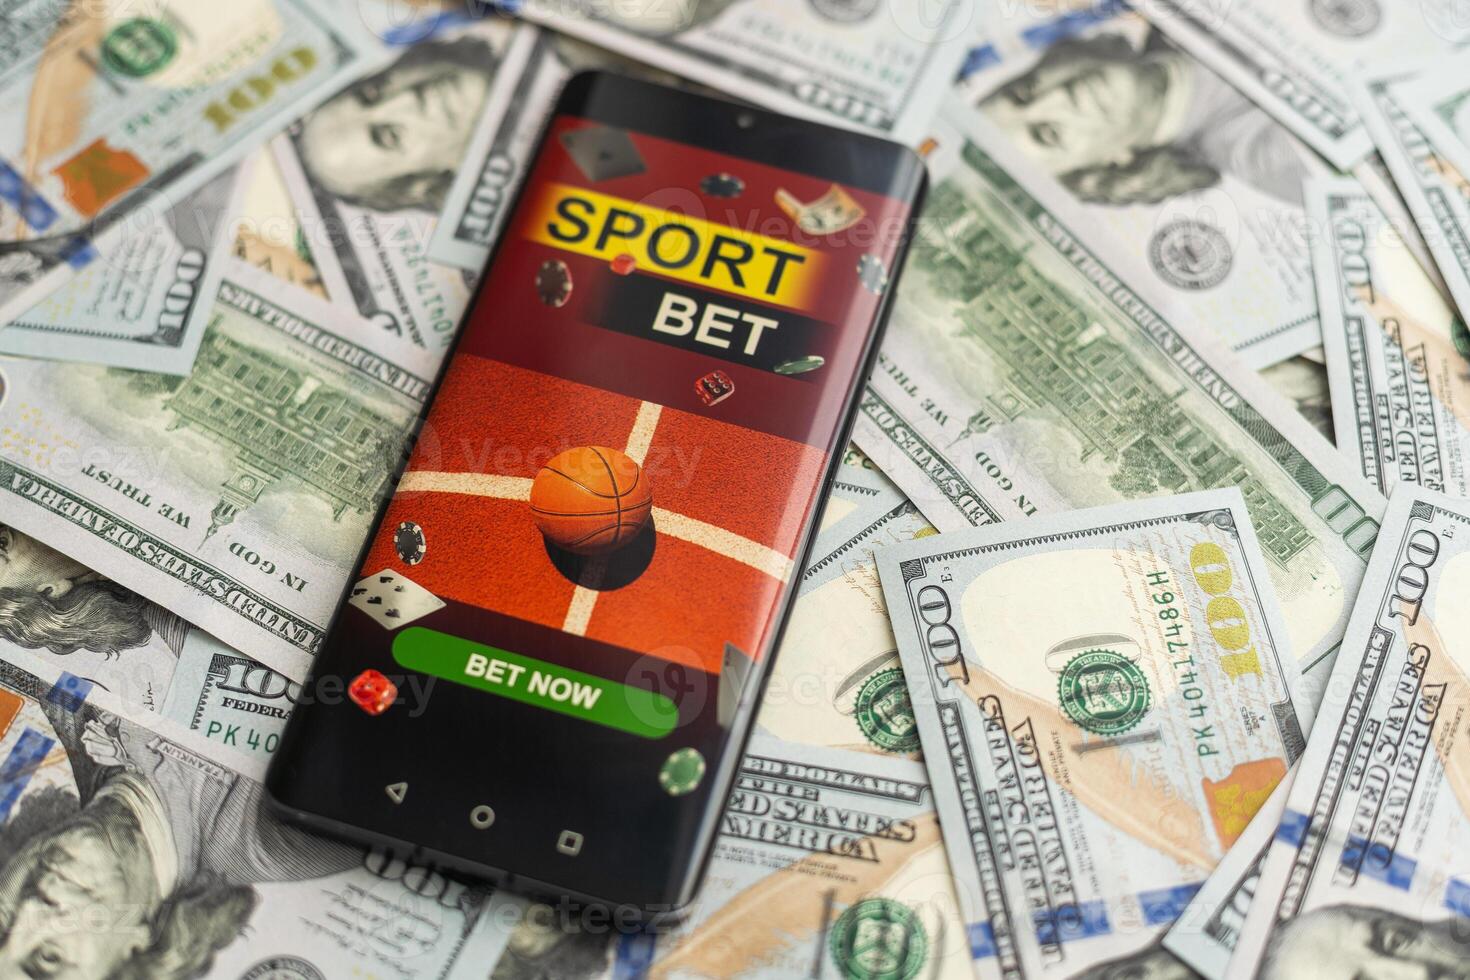 Sports betting website in a mobile phone screen, money photo